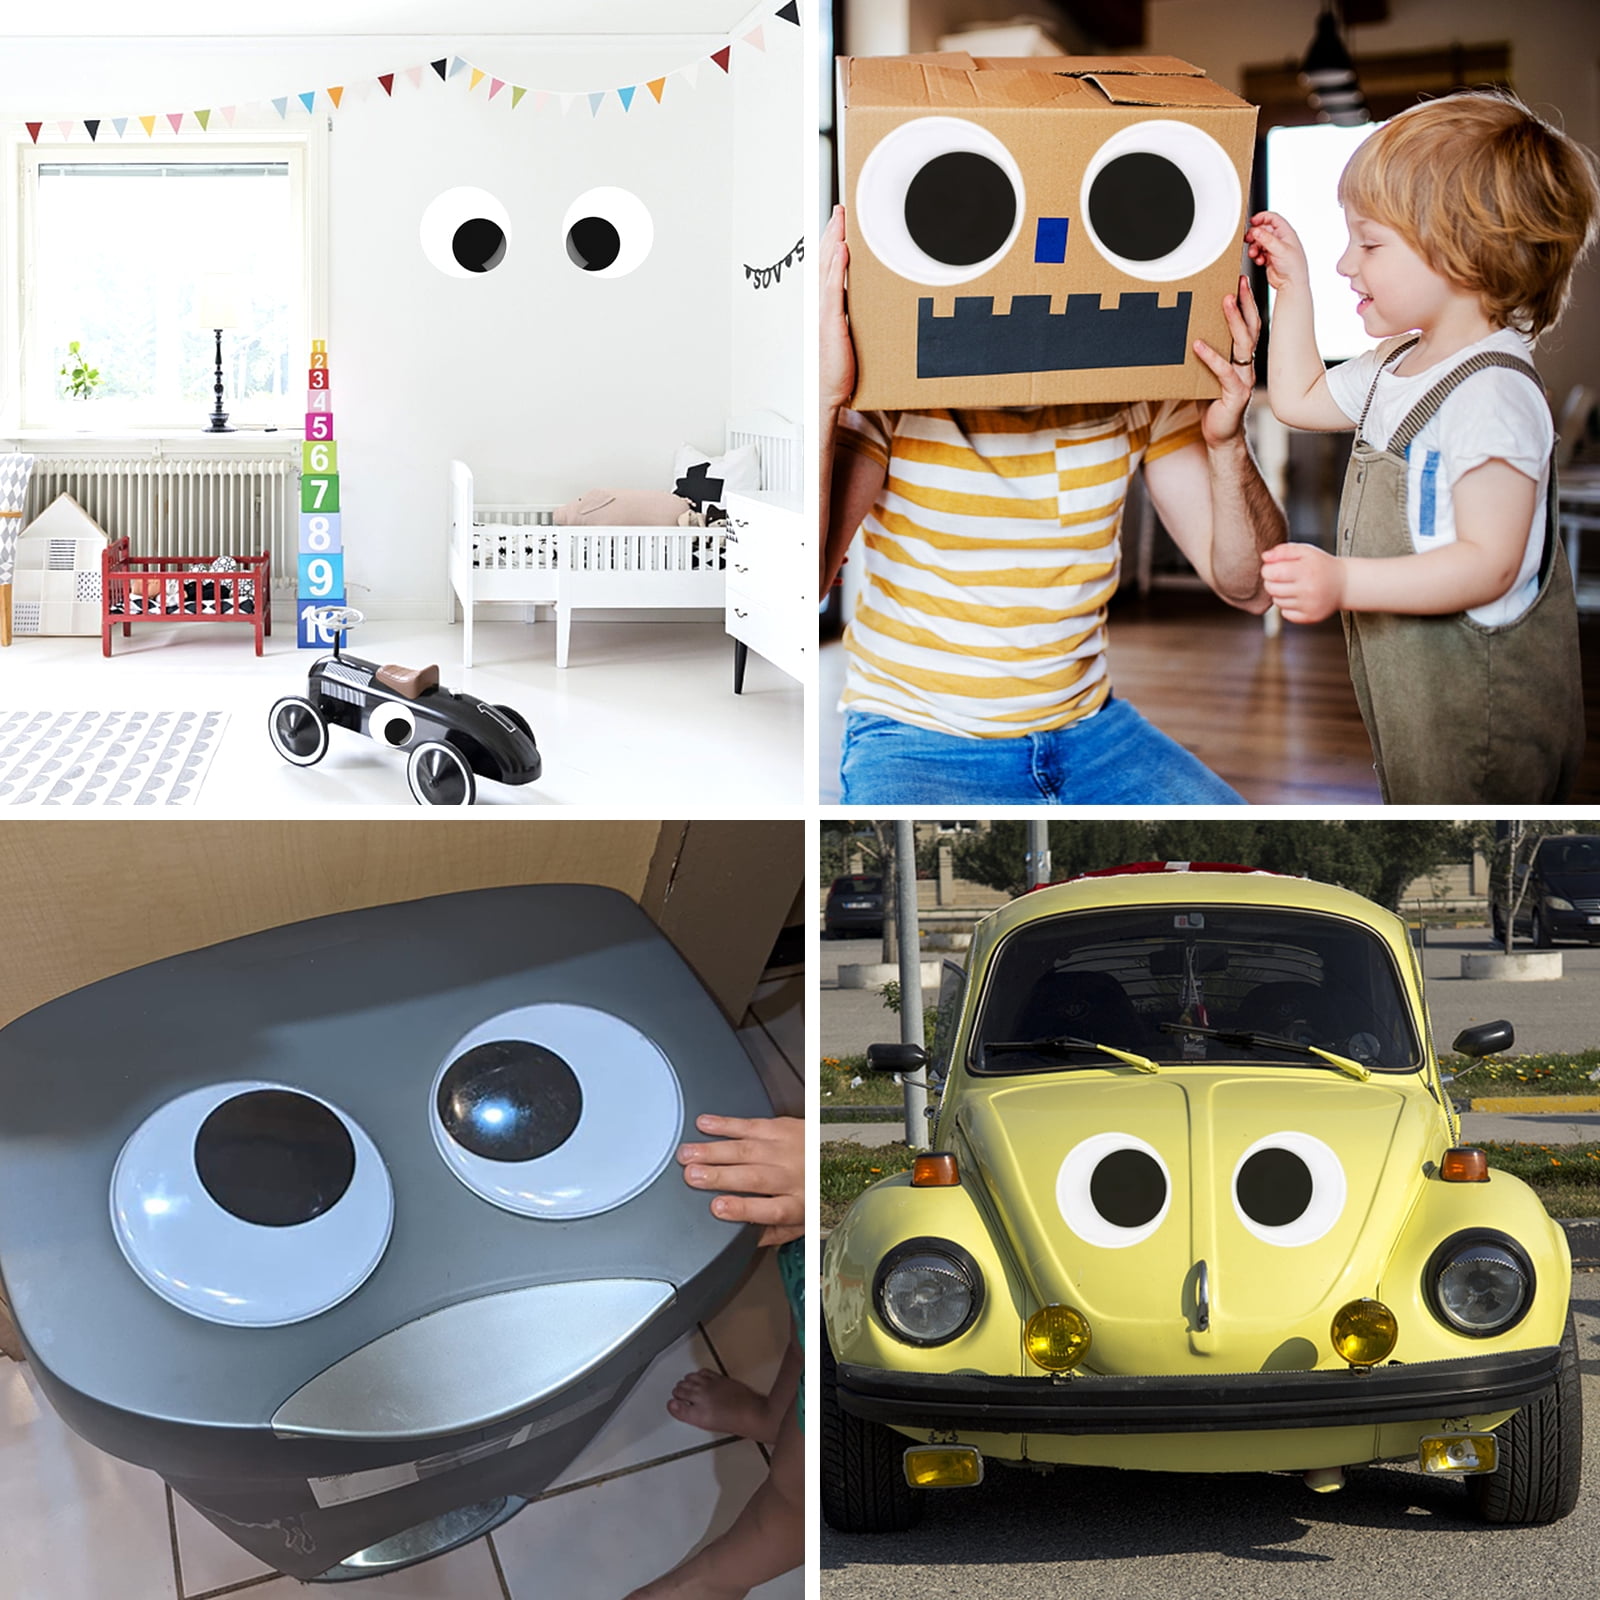 Benvo 7 inch Giant Googly Eyes Self Adhesive 18cm Big Wiggle Eyes Large Sticky Eyes for Party Decorations Refrigerator Door Christmas Trees Lawns Car